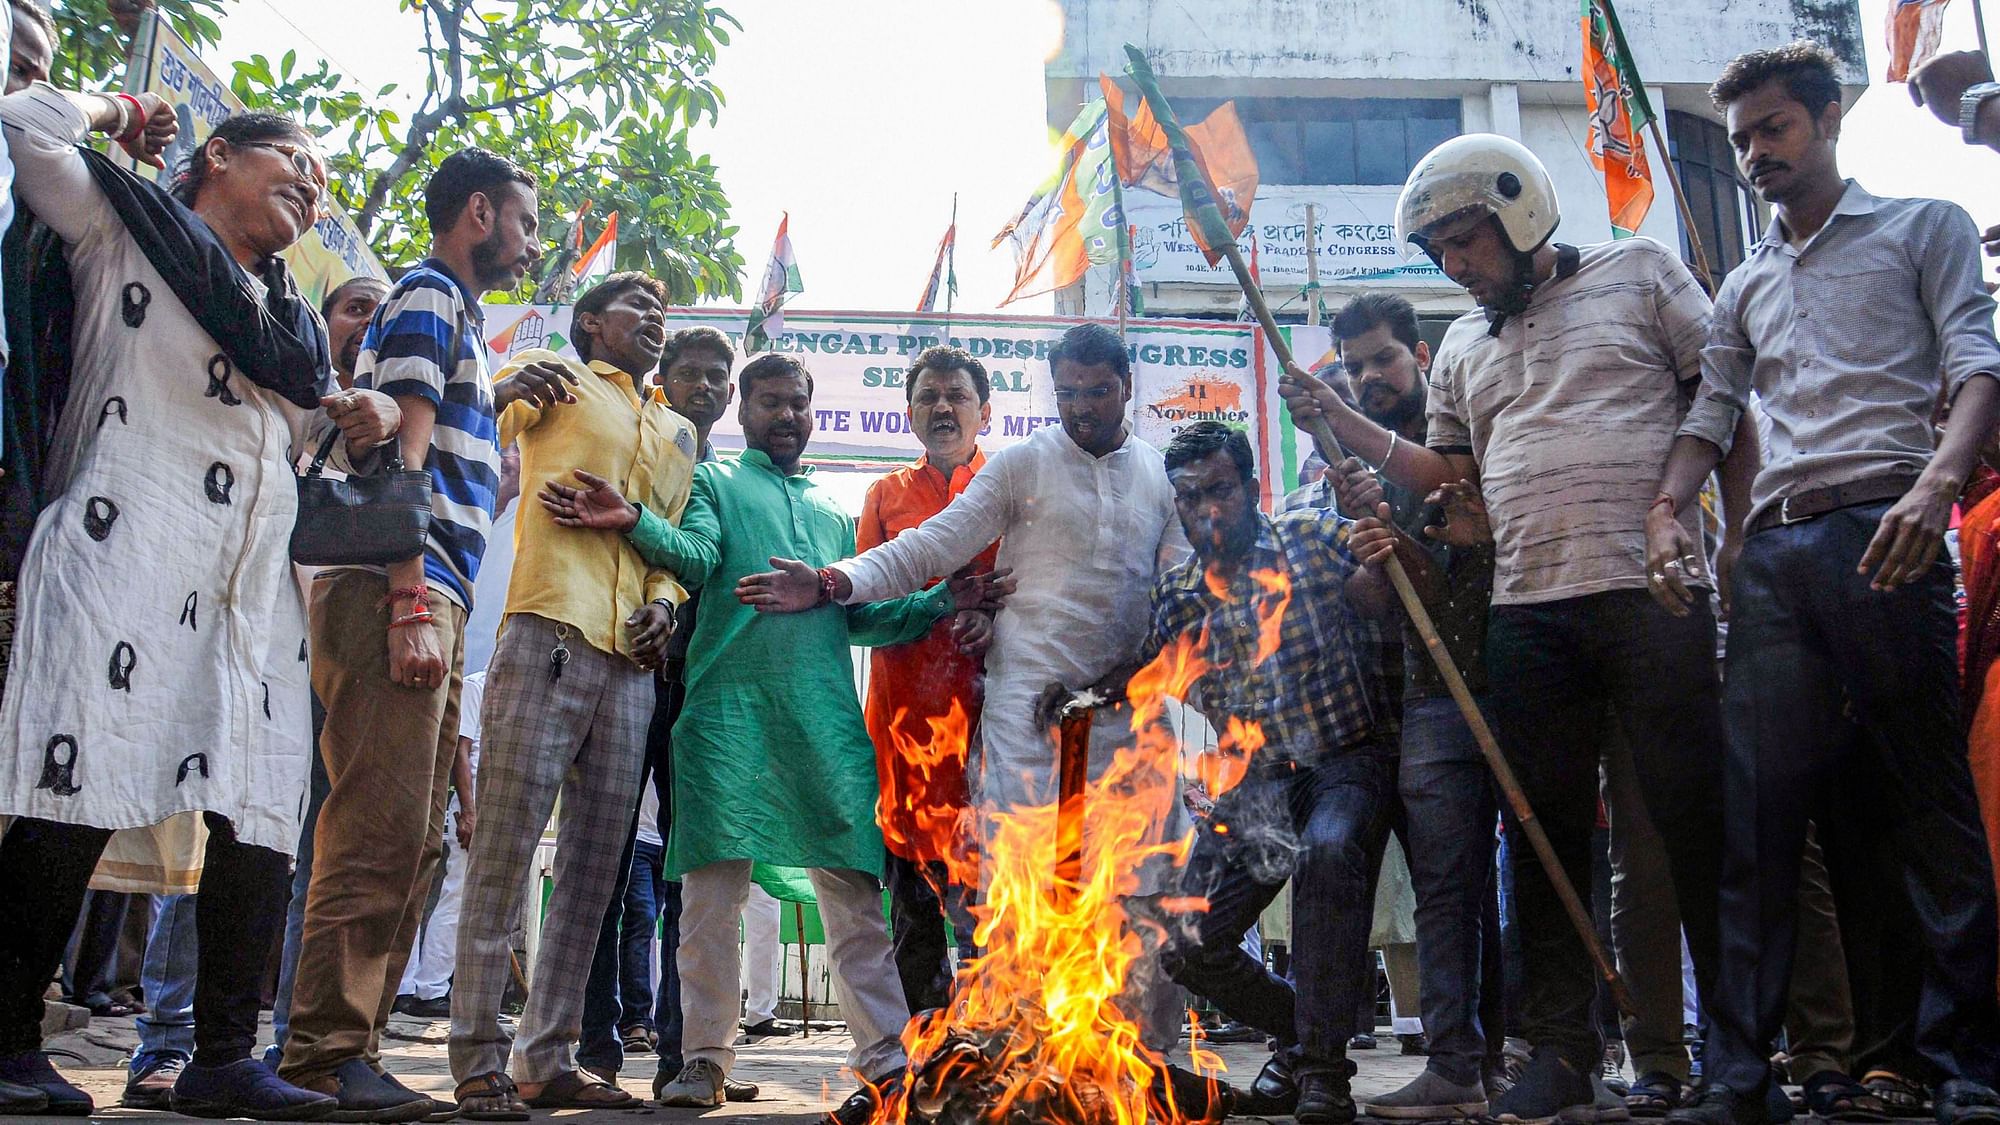 BJP workers in Kolkata burnt effigies of Rahul Gandhi, before Congress launched its own protest.